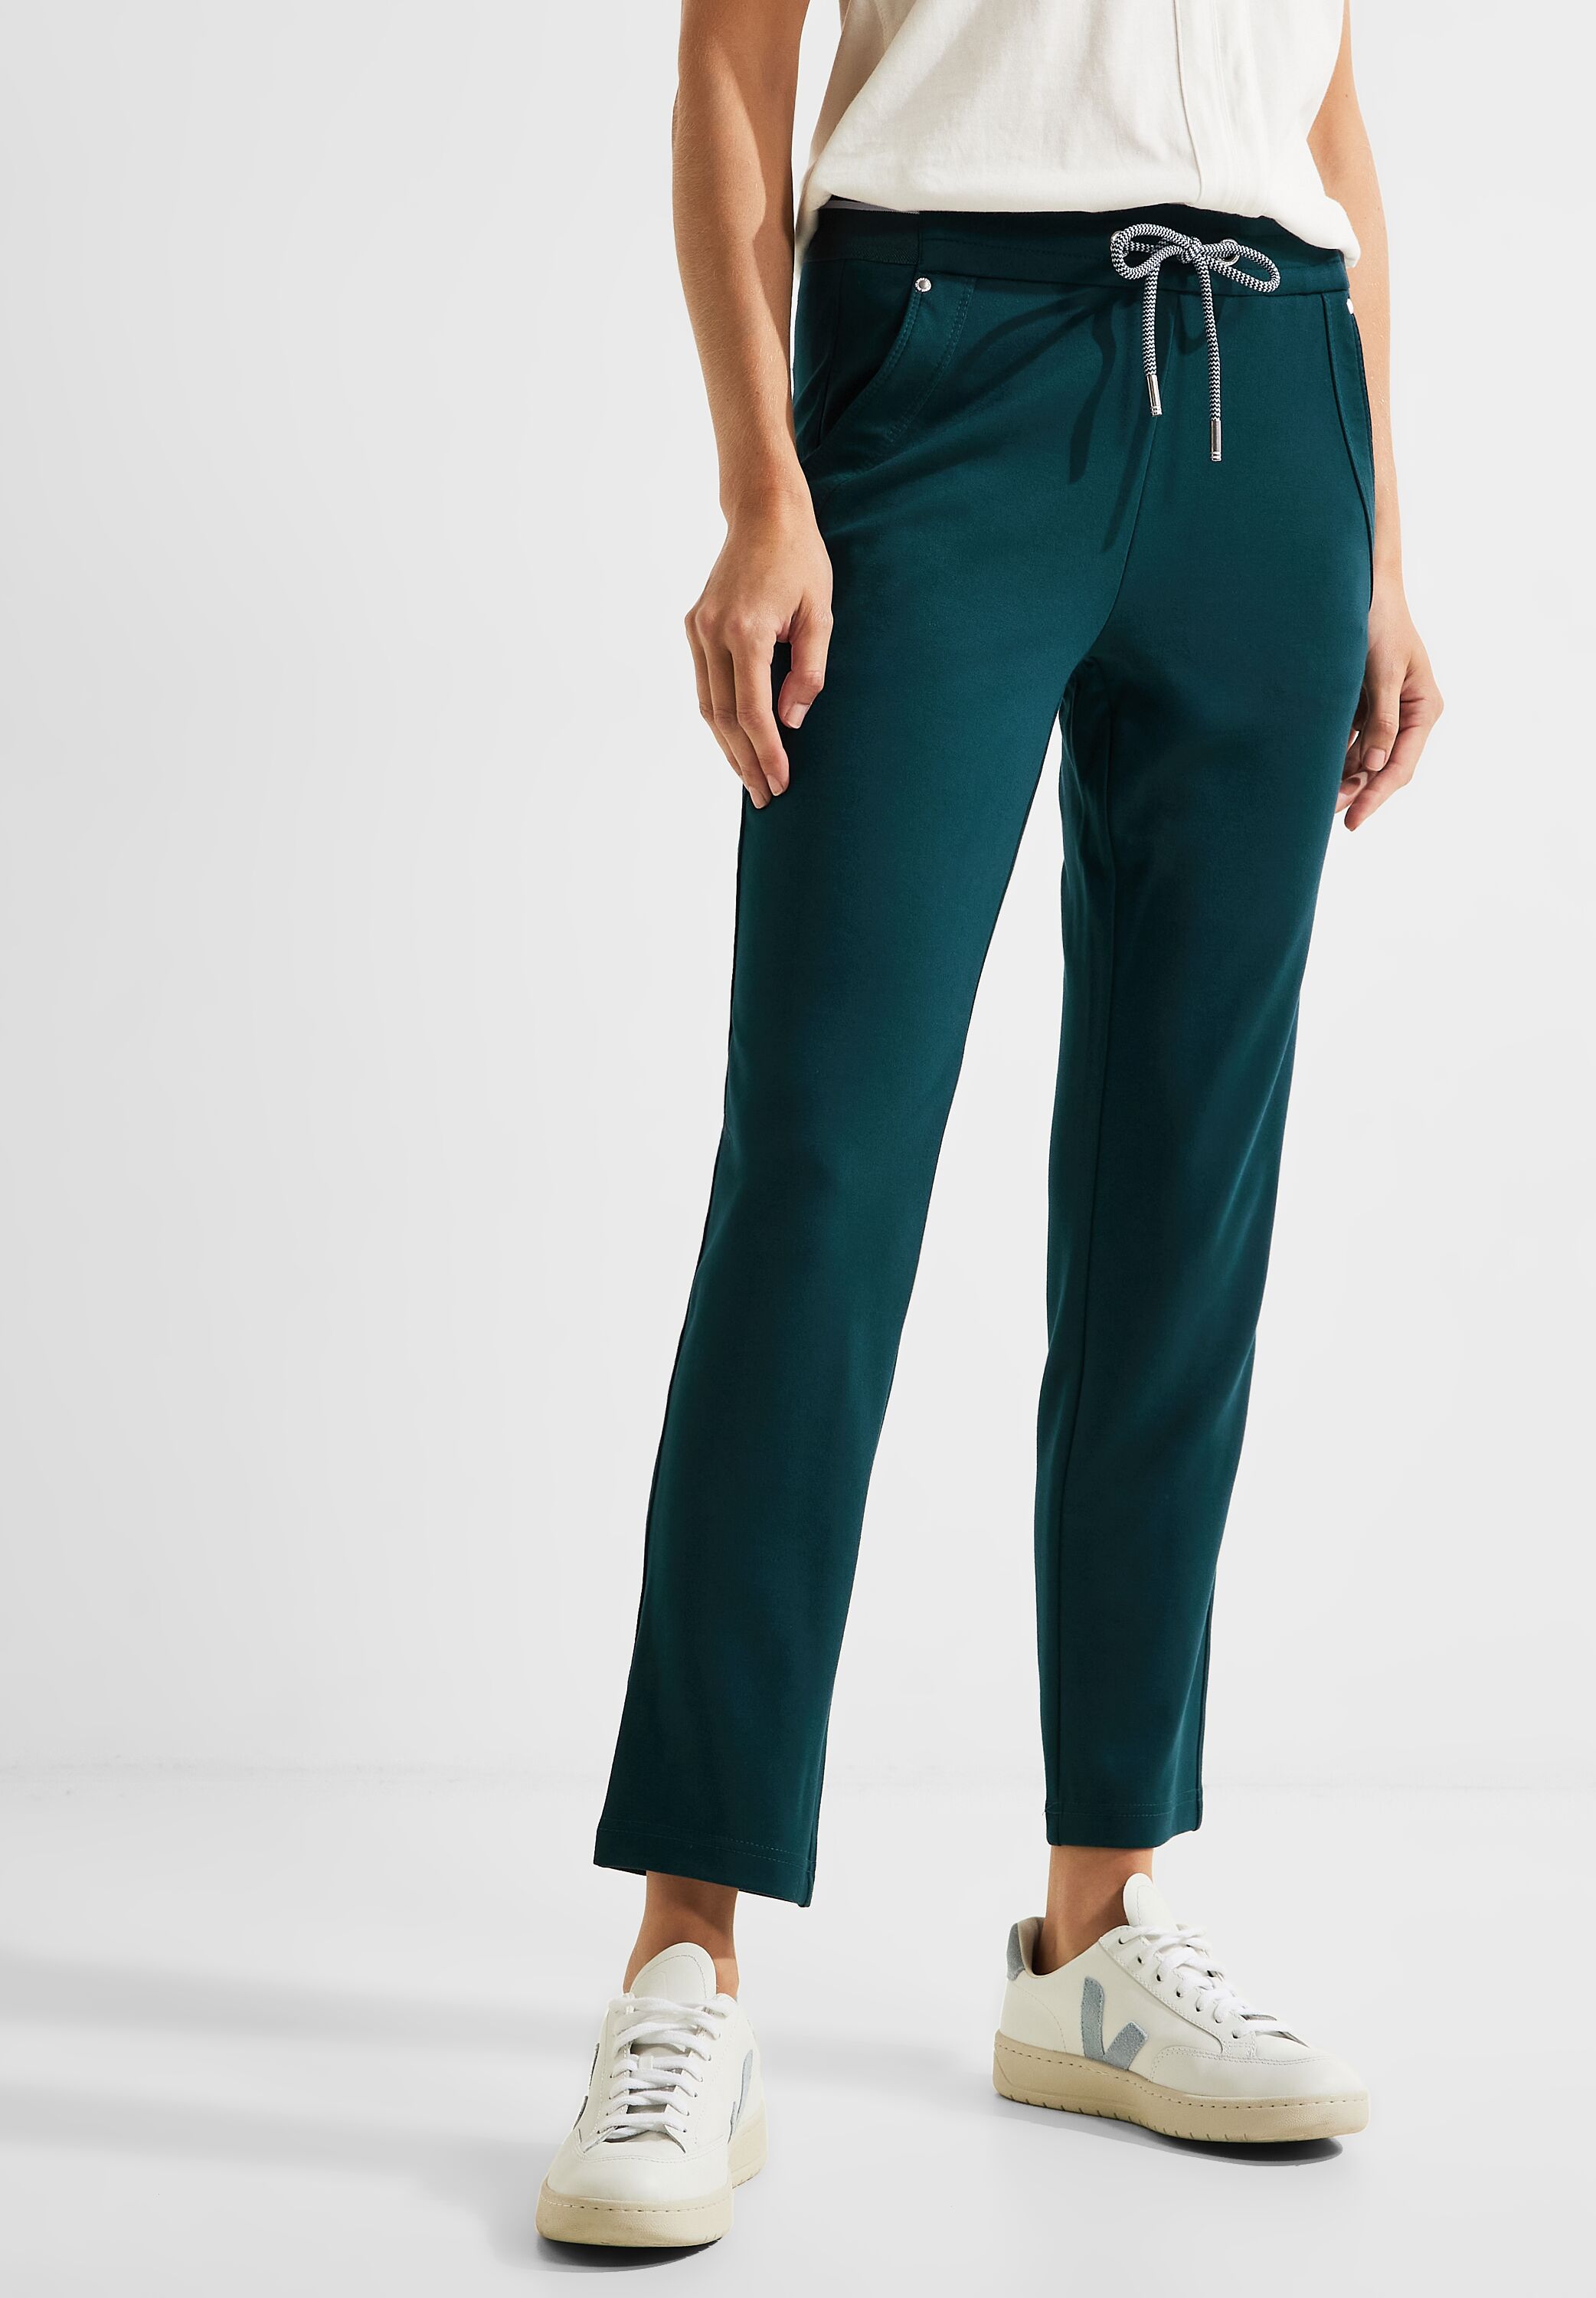 CONCEPT CECIL - Green in reduziert Tracey Lake SALE Deep Joggpant Mode B376689-14926 im